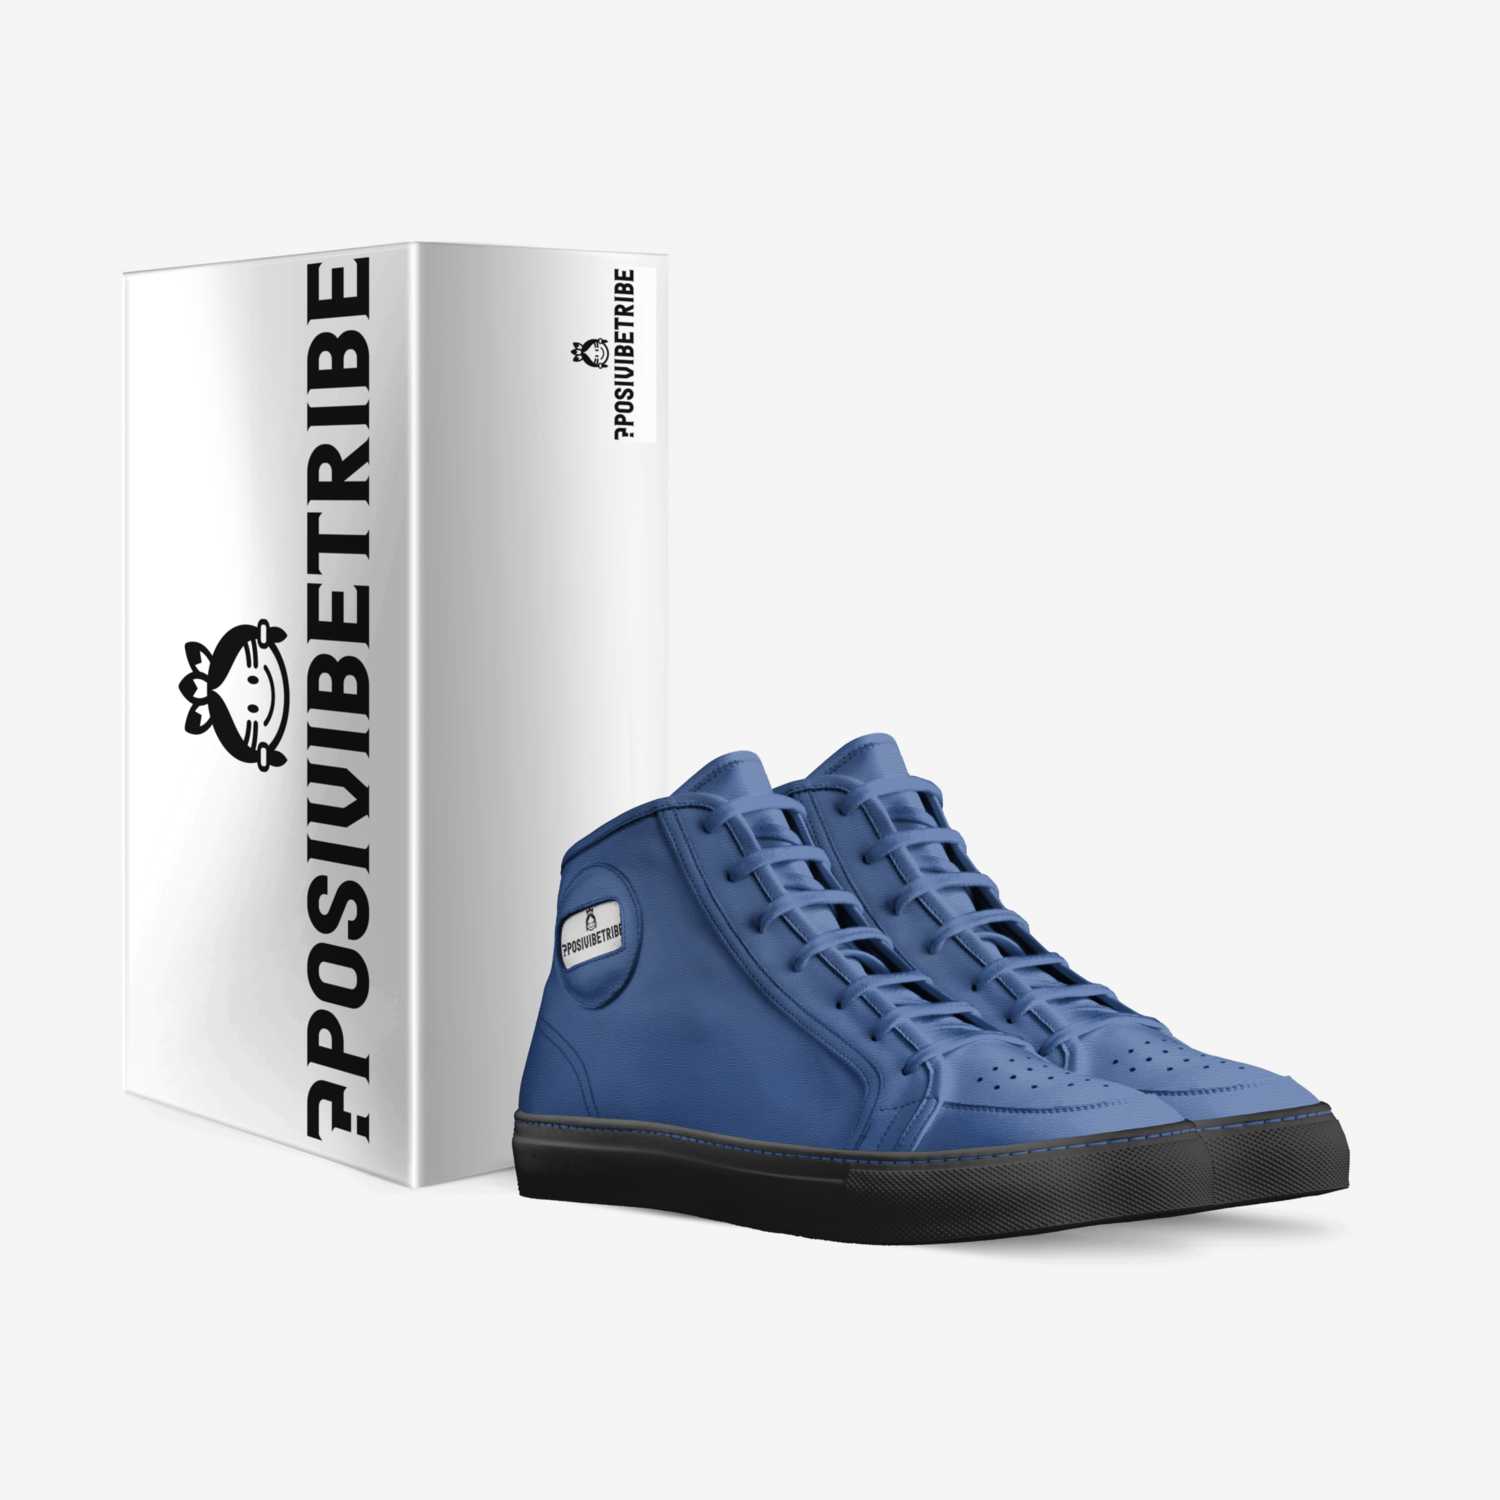 POSIVIBETRIBE 1'S custom made in Italy shoes by Ryan Worley | Box view